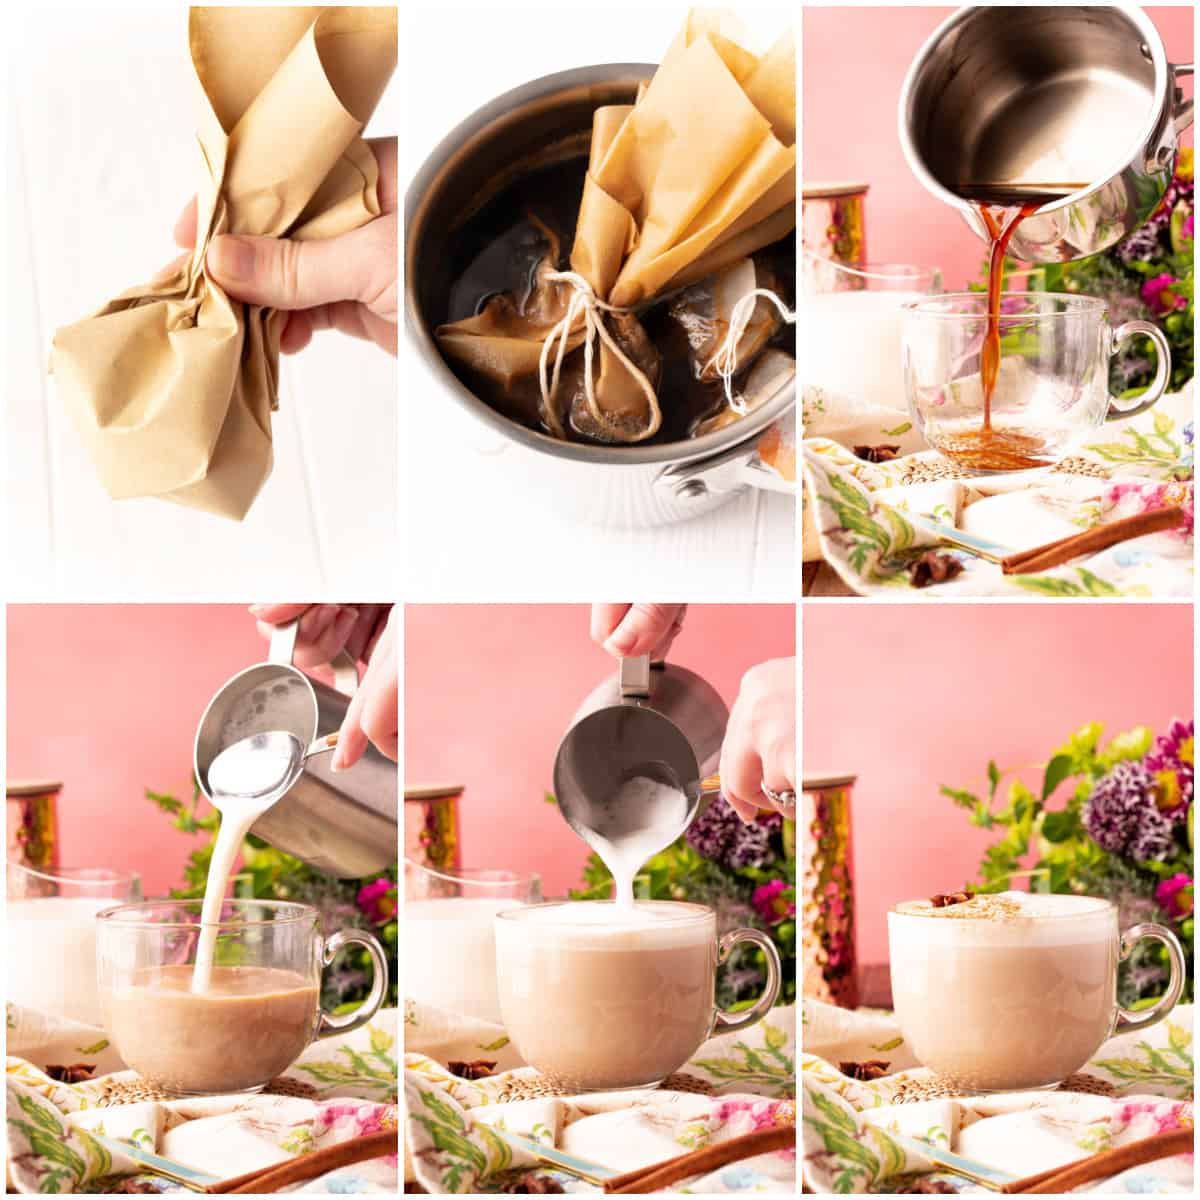 Step by step photos on how to make a Chai Latte Recipe.